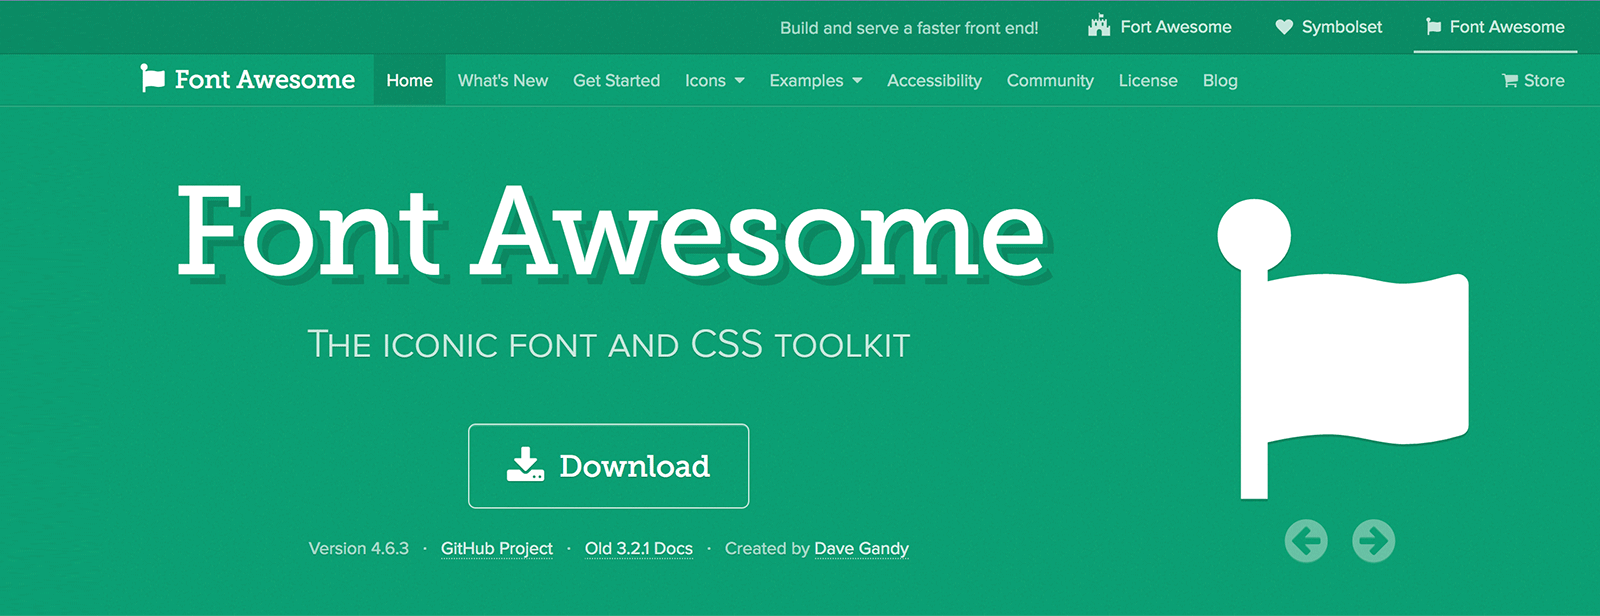 Font Awesome Review - and How to Use it with WordPress